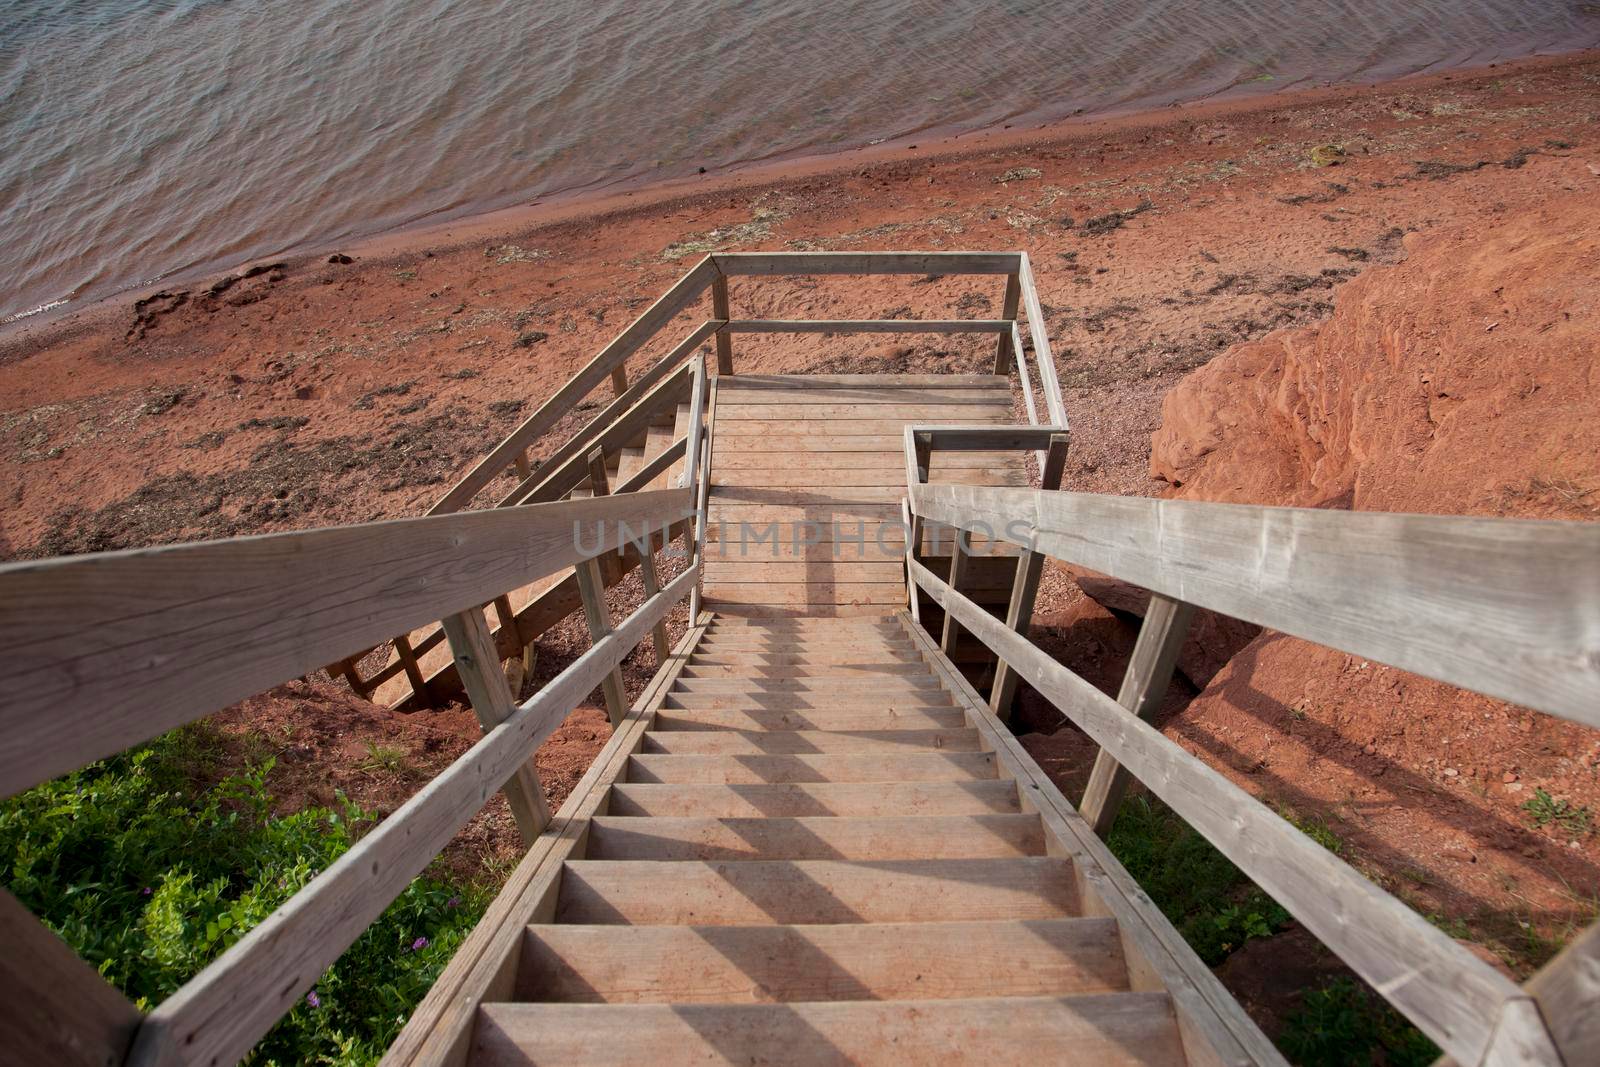 A staircase flight made of wood leading down to red clay beach below 